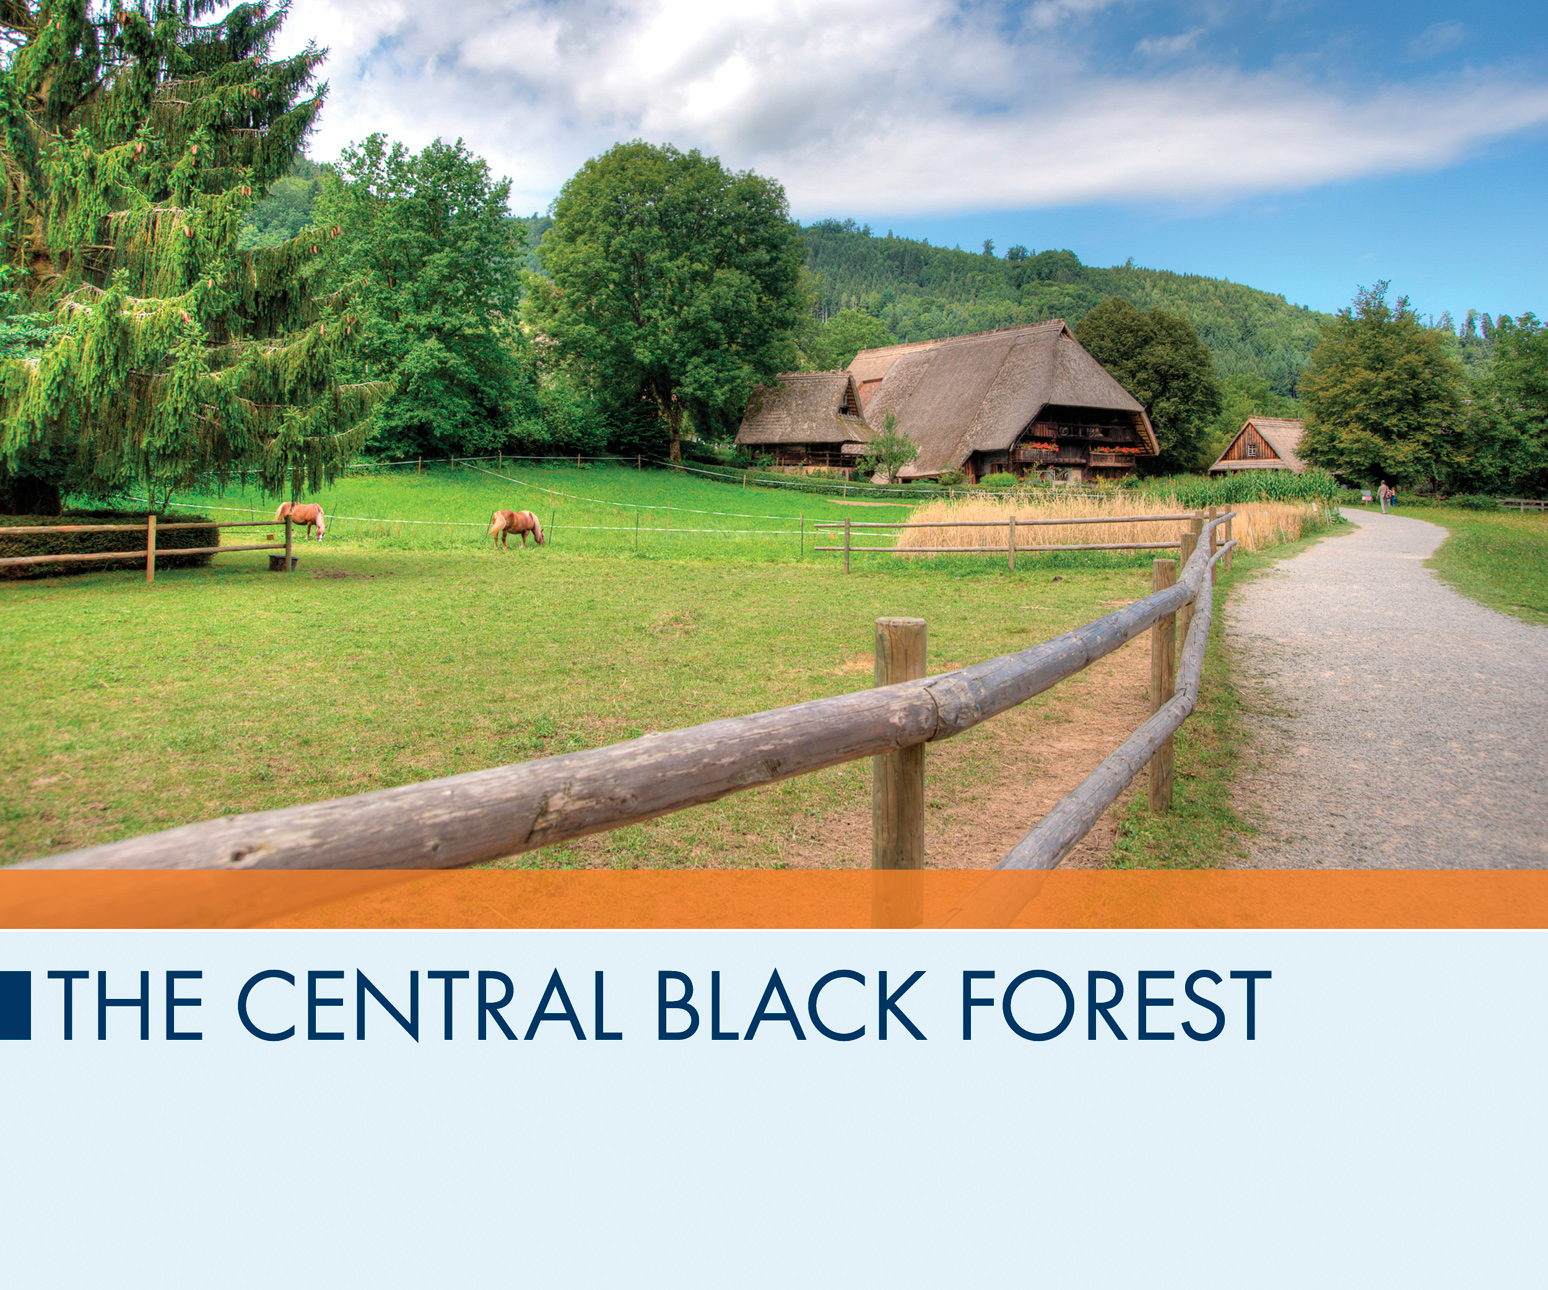 The Central Black Forest